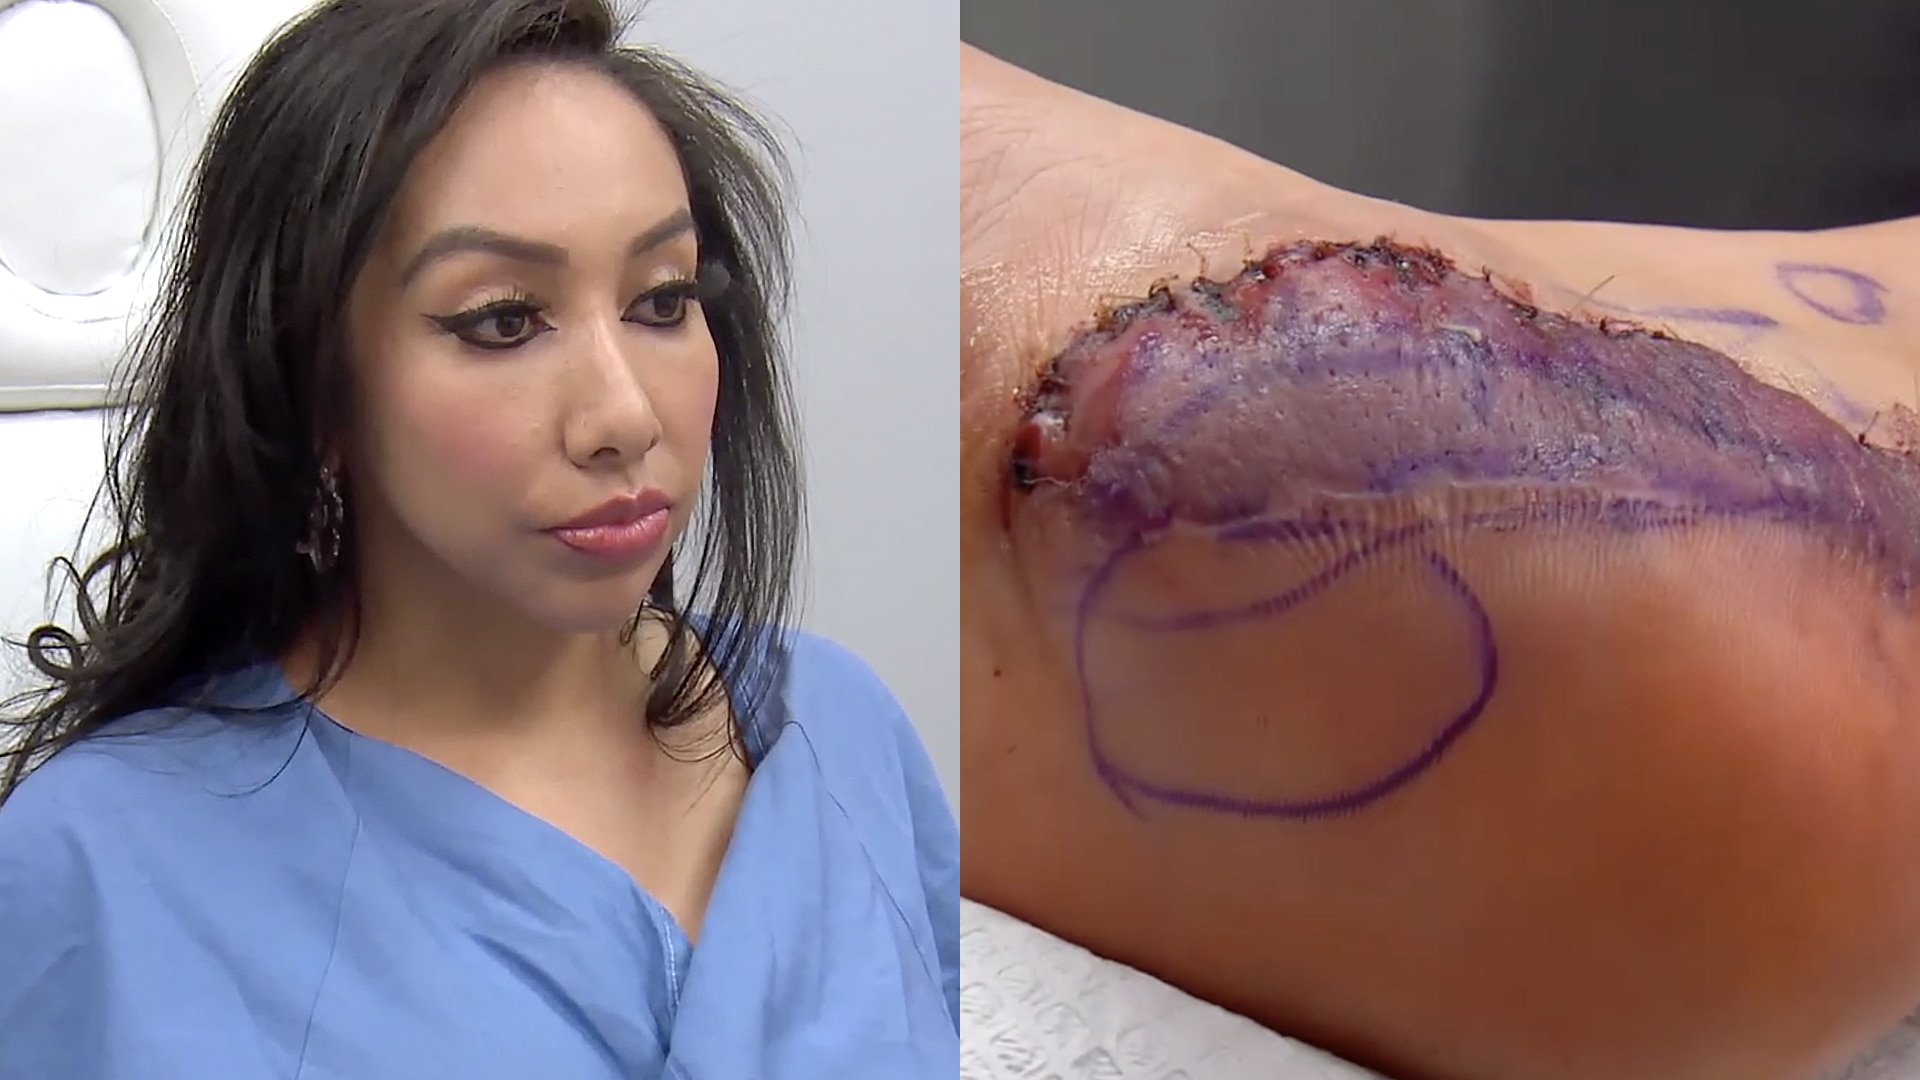 Botched' Features The Case Of A 'Mexican Tummy Tuck' And 'Grandma Boobs': 2  Surgeries That Went Horribly Wrong